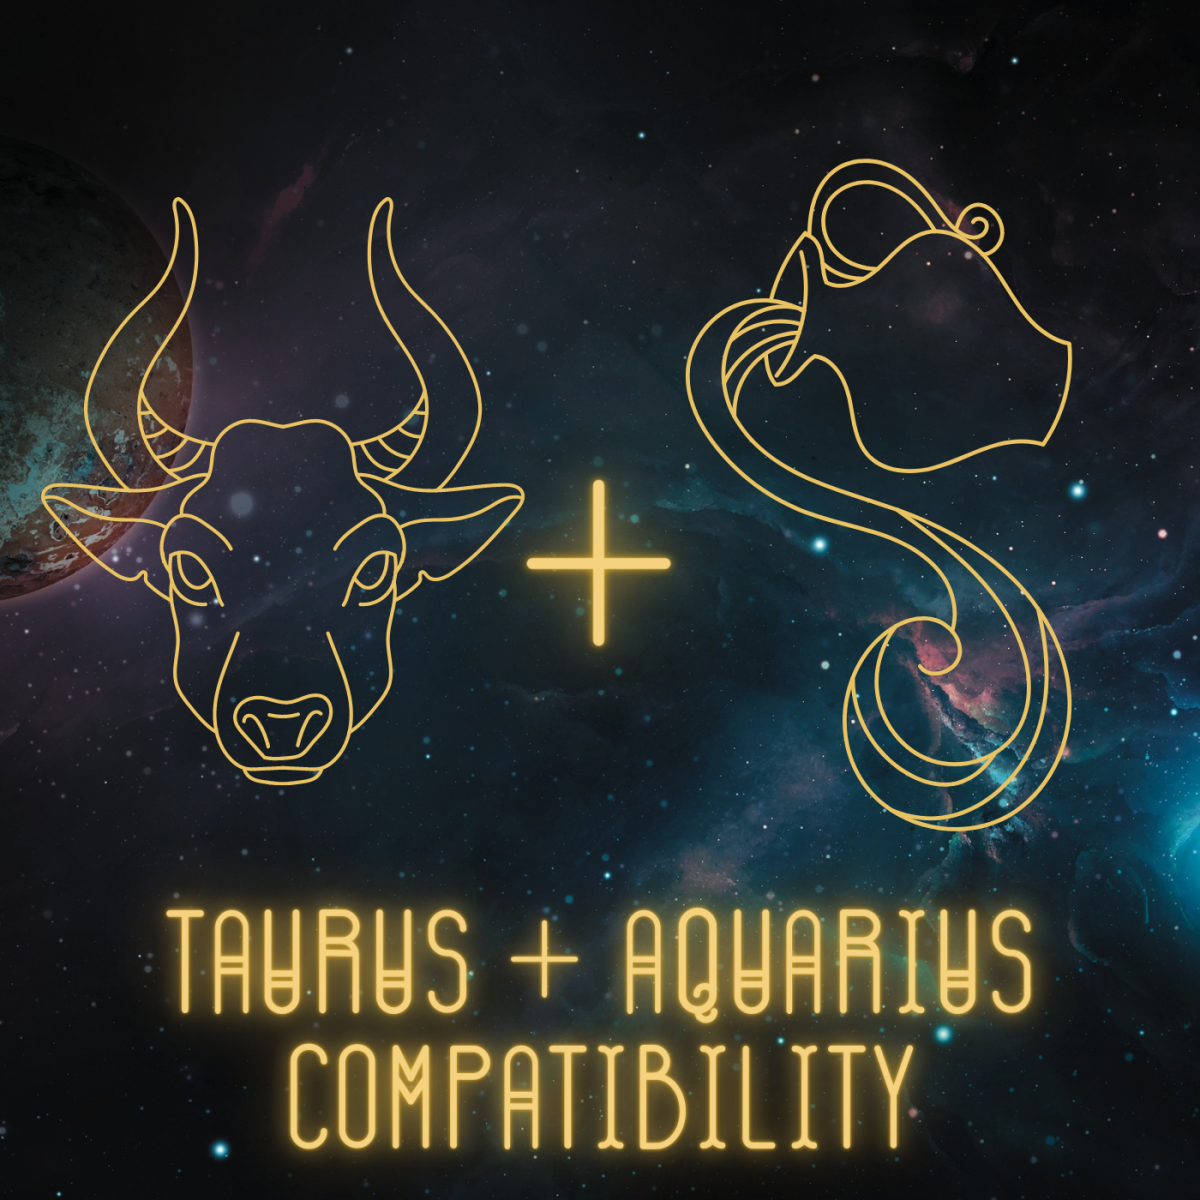 Can Aquarius and Taurus learn to get along, or are they constantly clashing?